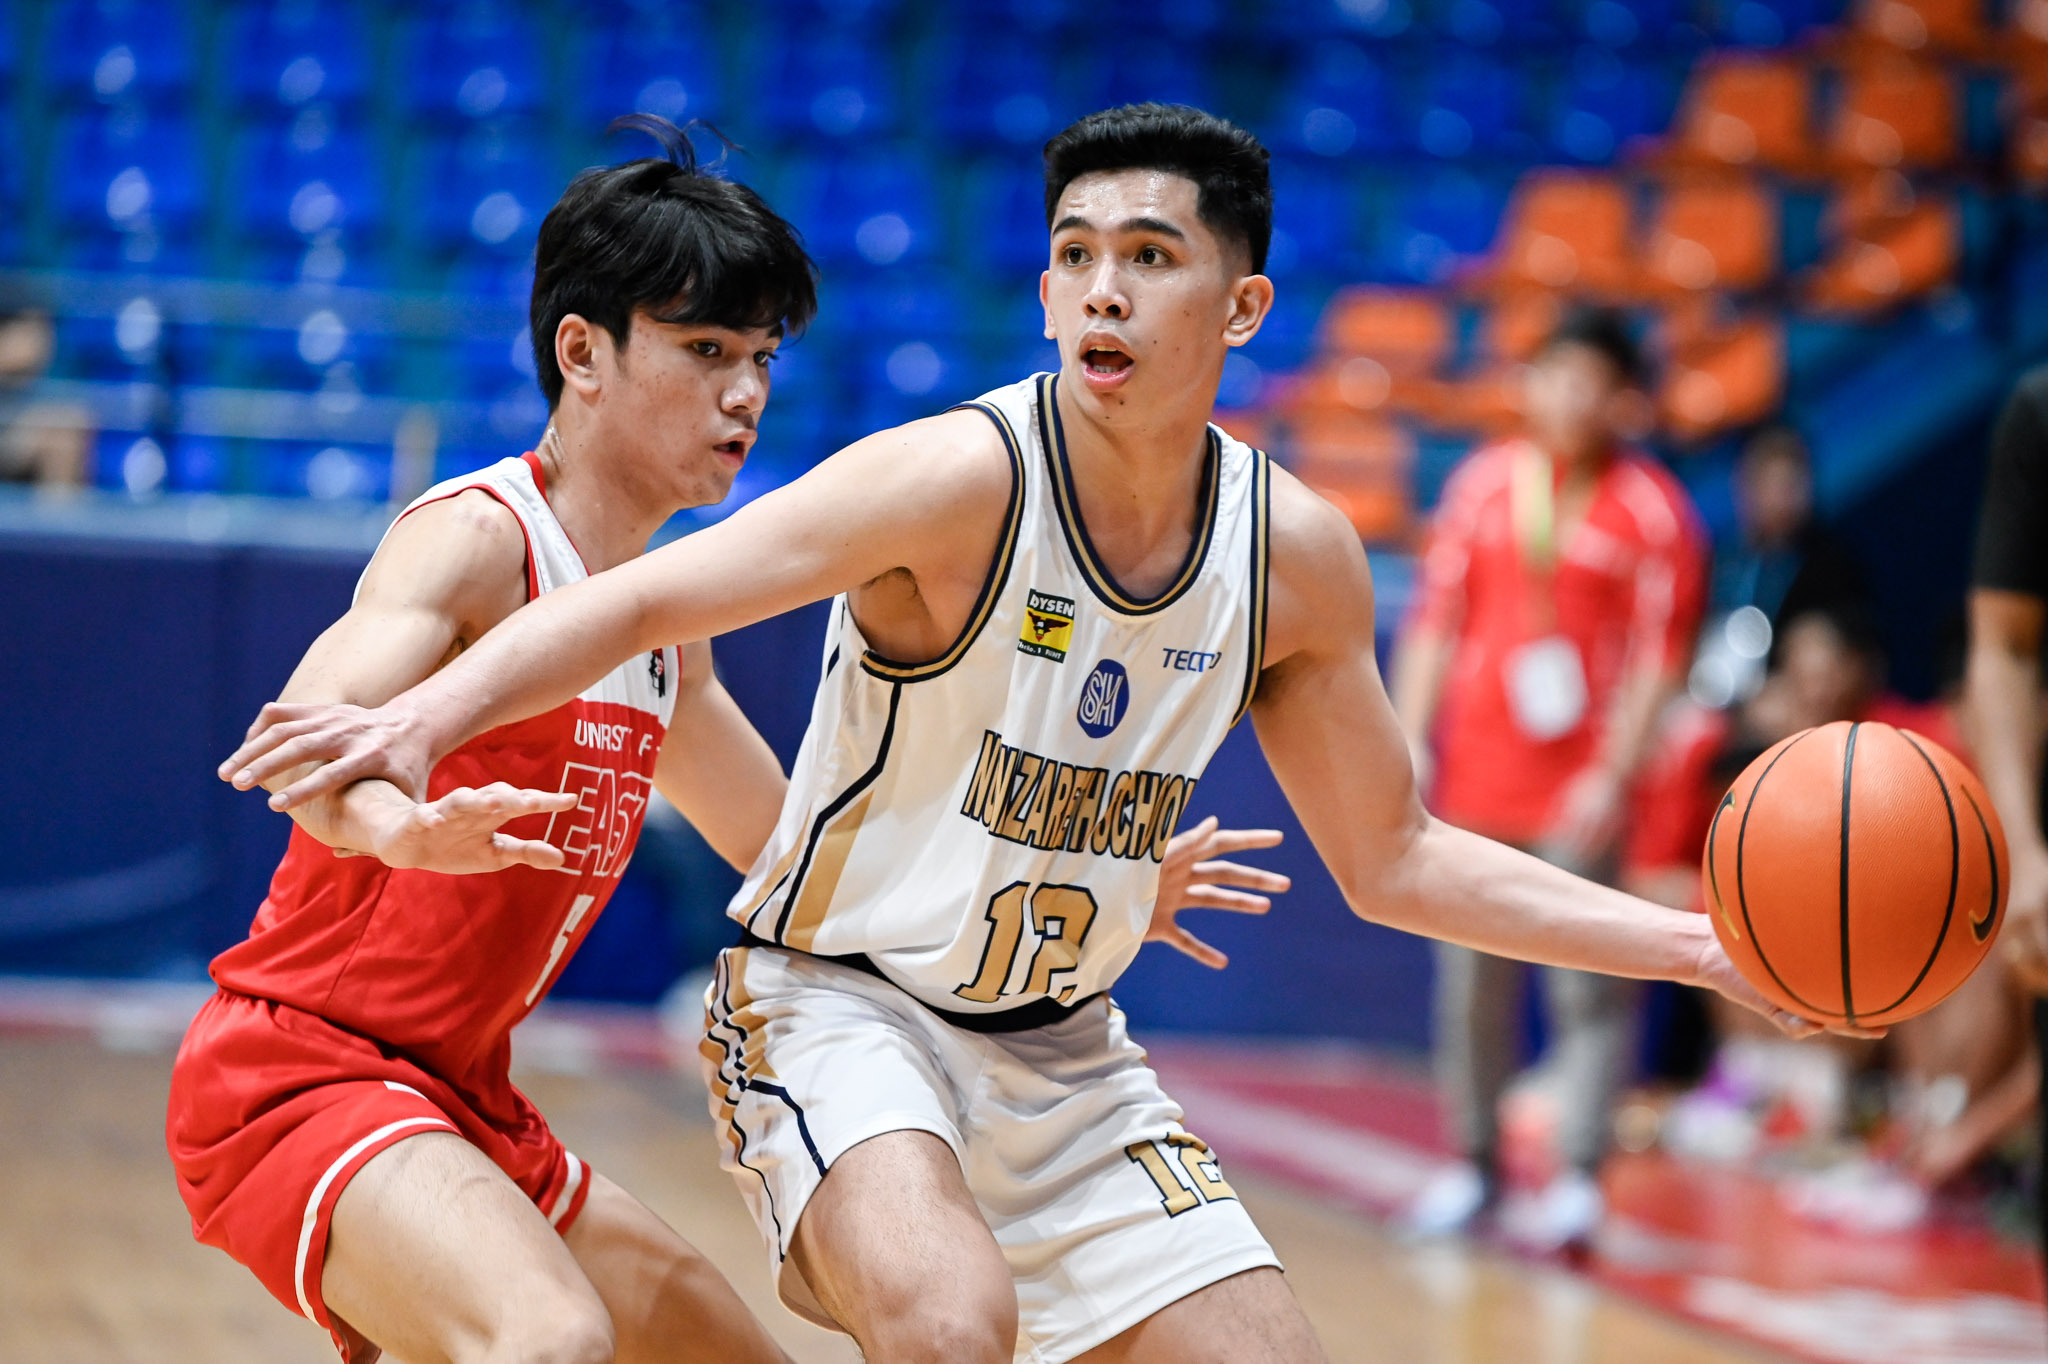 UAAP85-BBB-Reinhard-Jumamoy-7805095 UAAP 85 BBB: JP Pangilinan torches Ateneo as UST has one foot in Final Four ADMU Basketball News NU UAAP UE UST  - philippine sports news